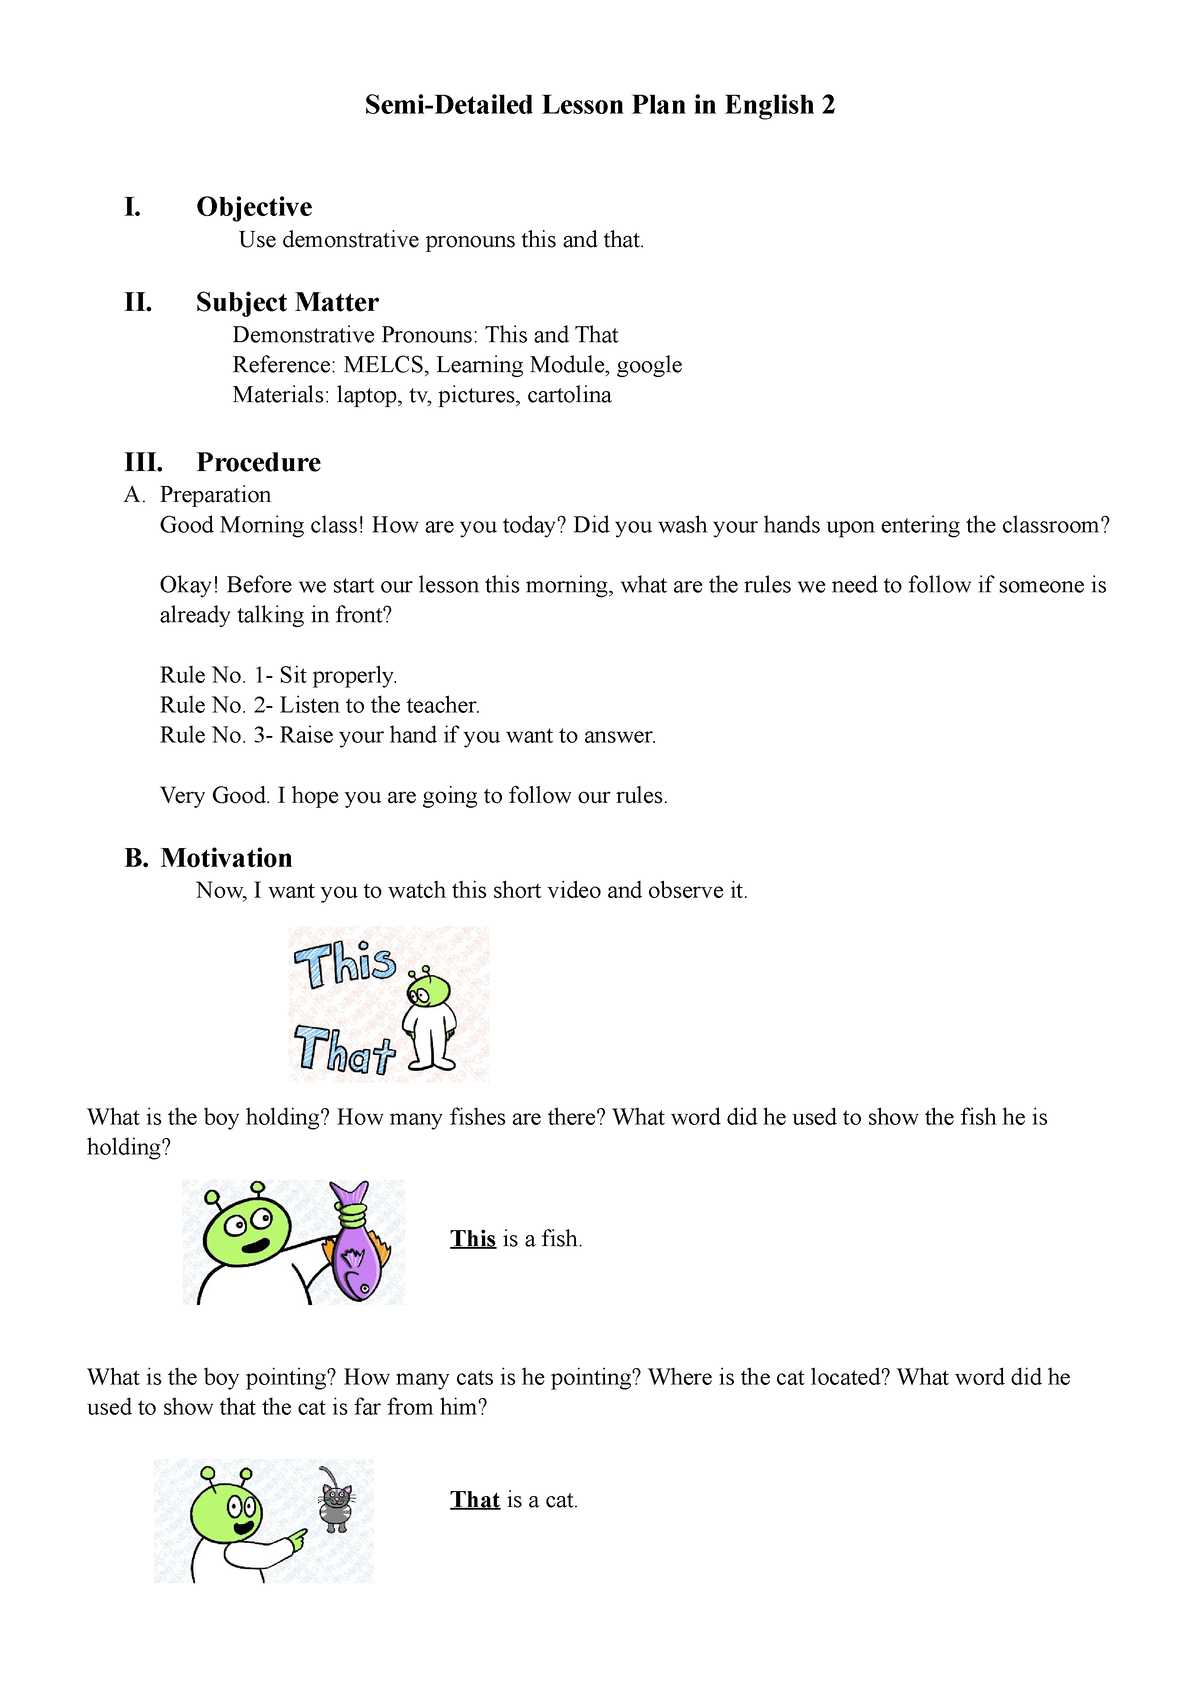 semi-detailed-lesson-plan-for-cot-2-semi-detailed-lesson-plan-in-english-2-i-objective-use